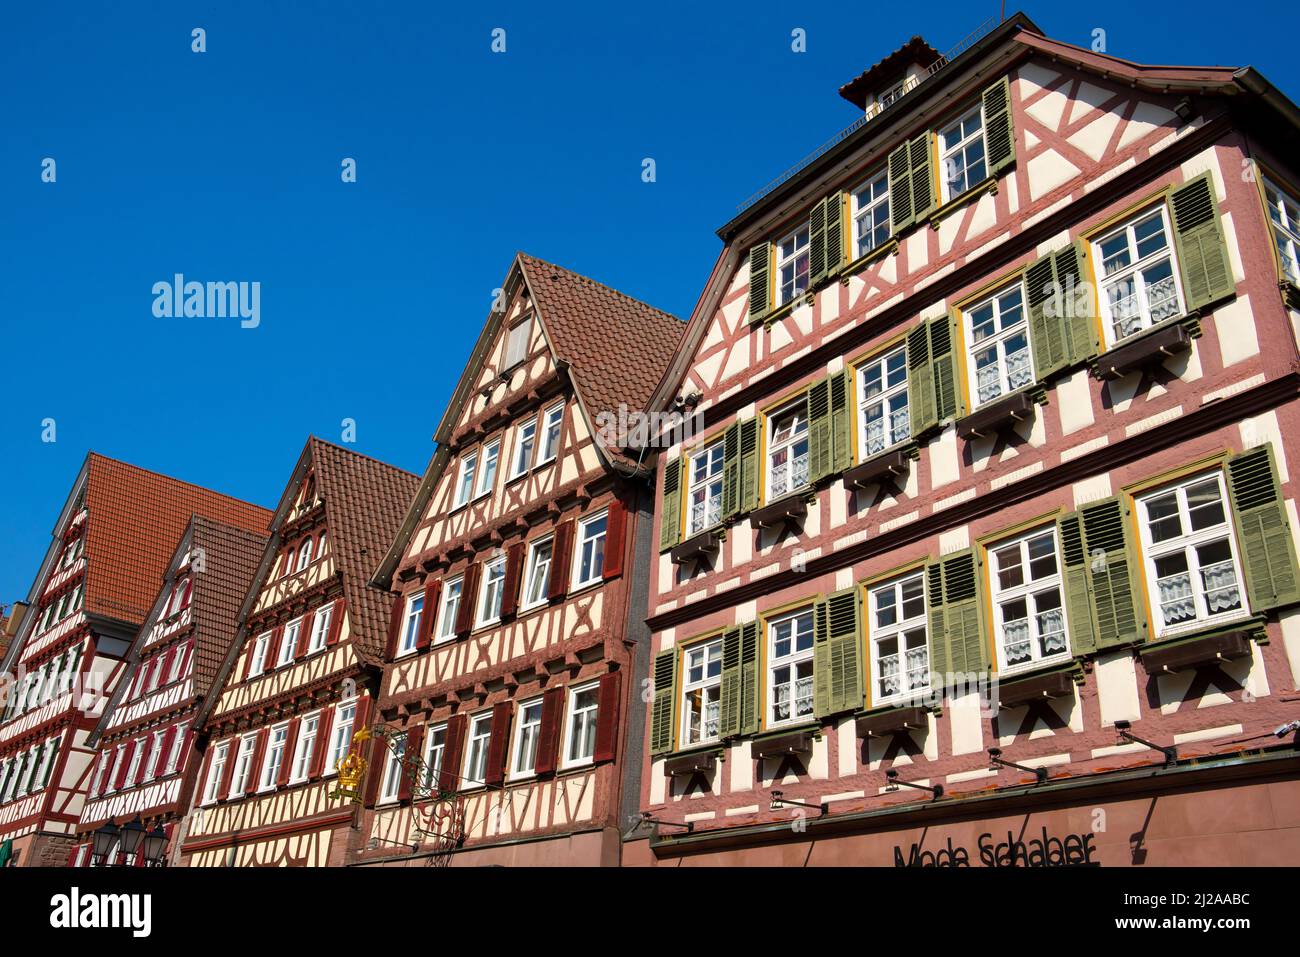 Picturesque half-timbered houses in Calw old town, market place. Baden-Württemberg, Germany. Stock Photo